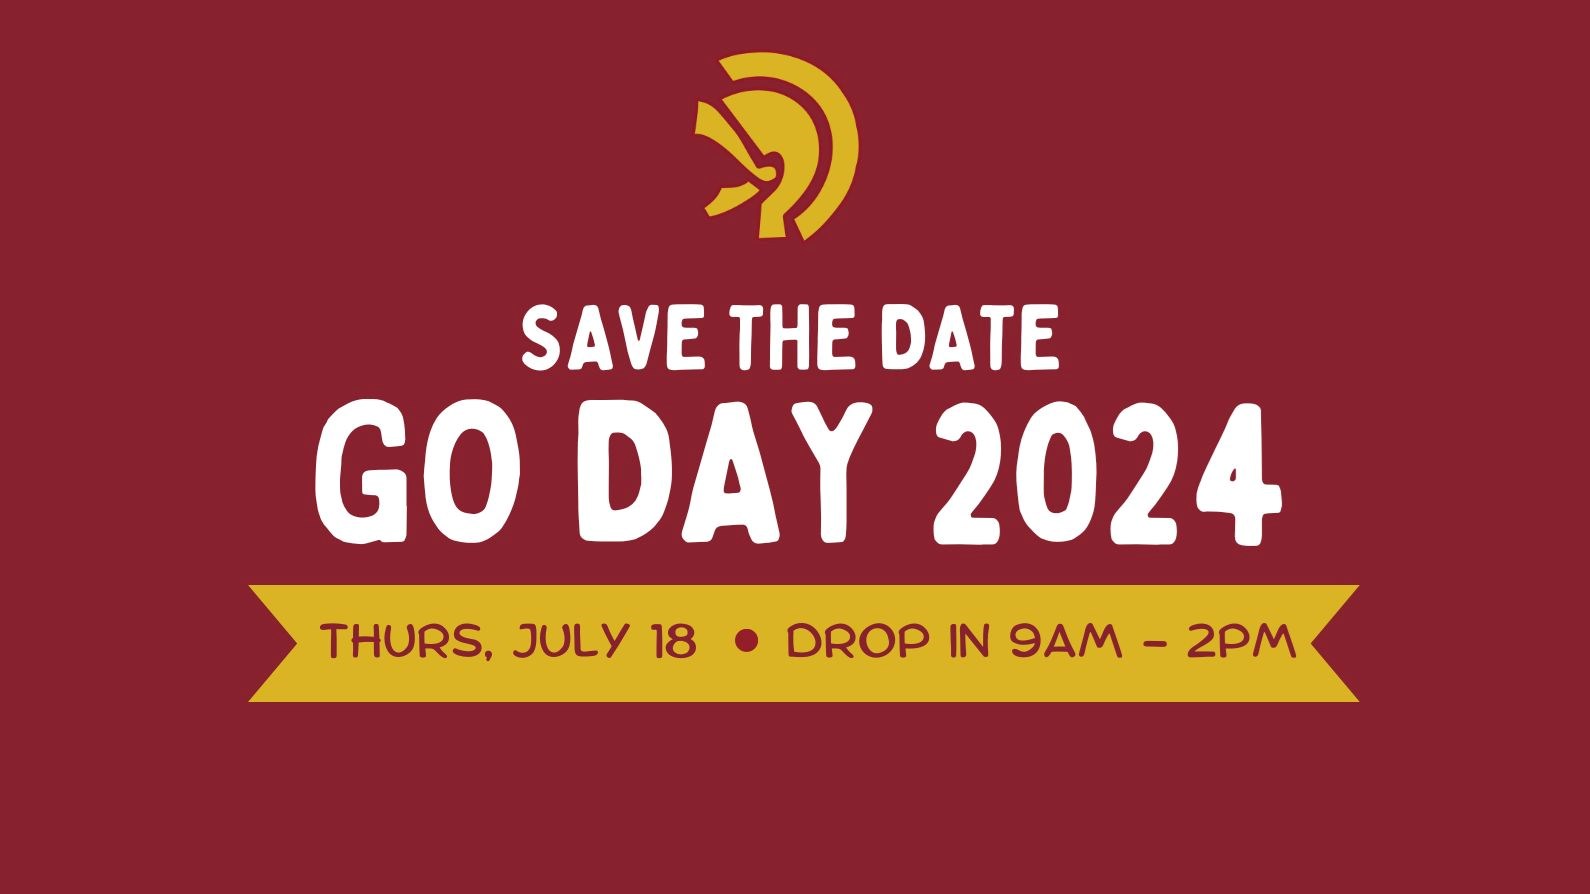 Save the Date - Go Day 2024